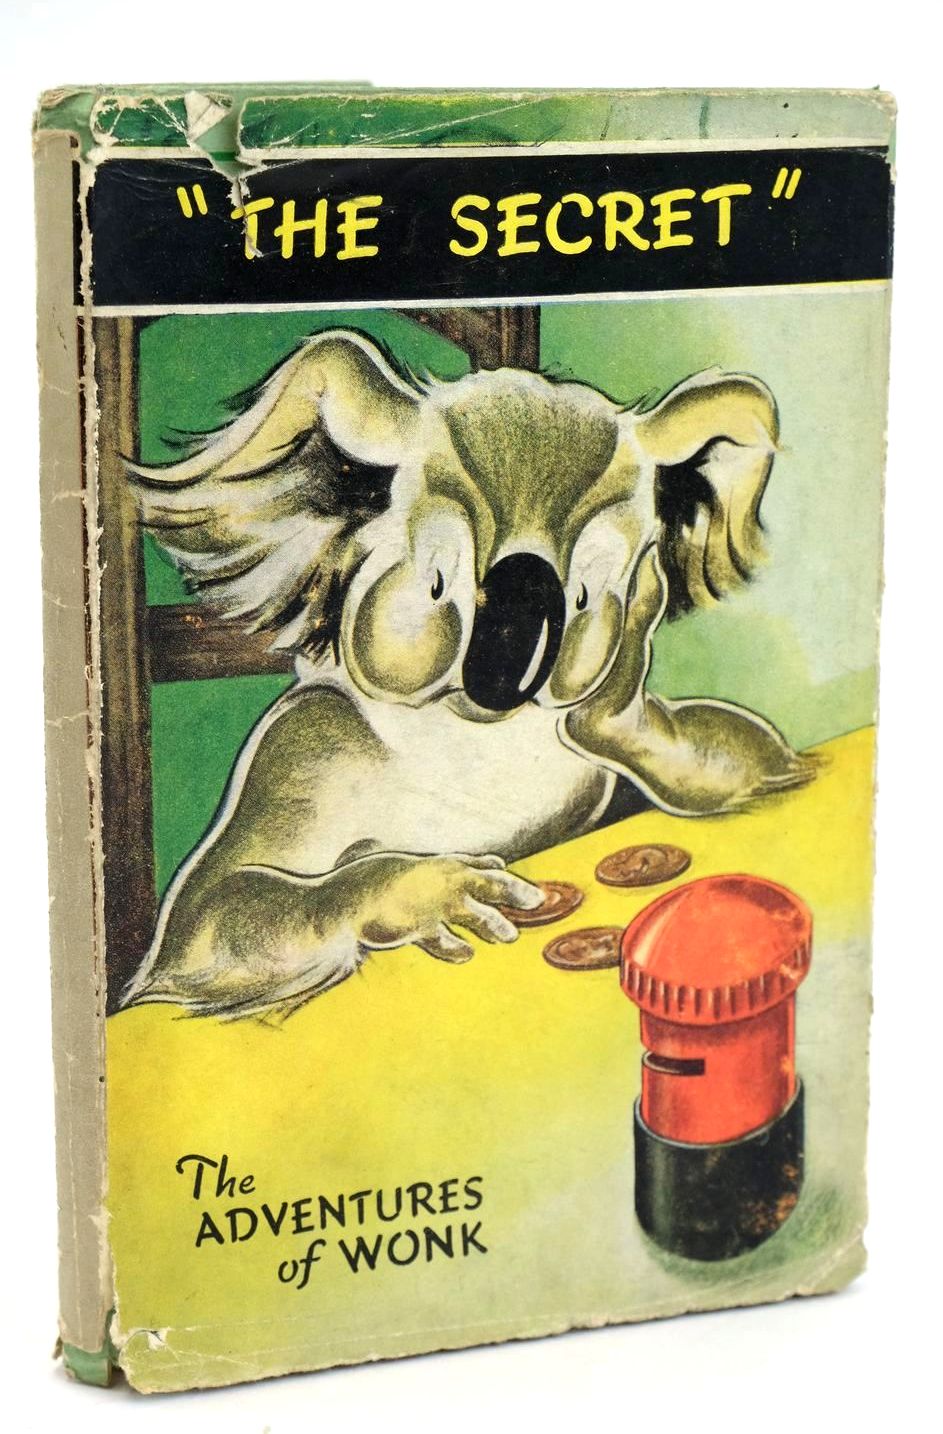 Photo of THE ADVENTURES OF WONK - THE SECRET written by Levy, Muriel illustrated by Kiddell-Monroe, Joan published by Wills &amp; Hepworth Ltd. (STOCK CODE: 1319262)  for sale by Stella & Rose's Books